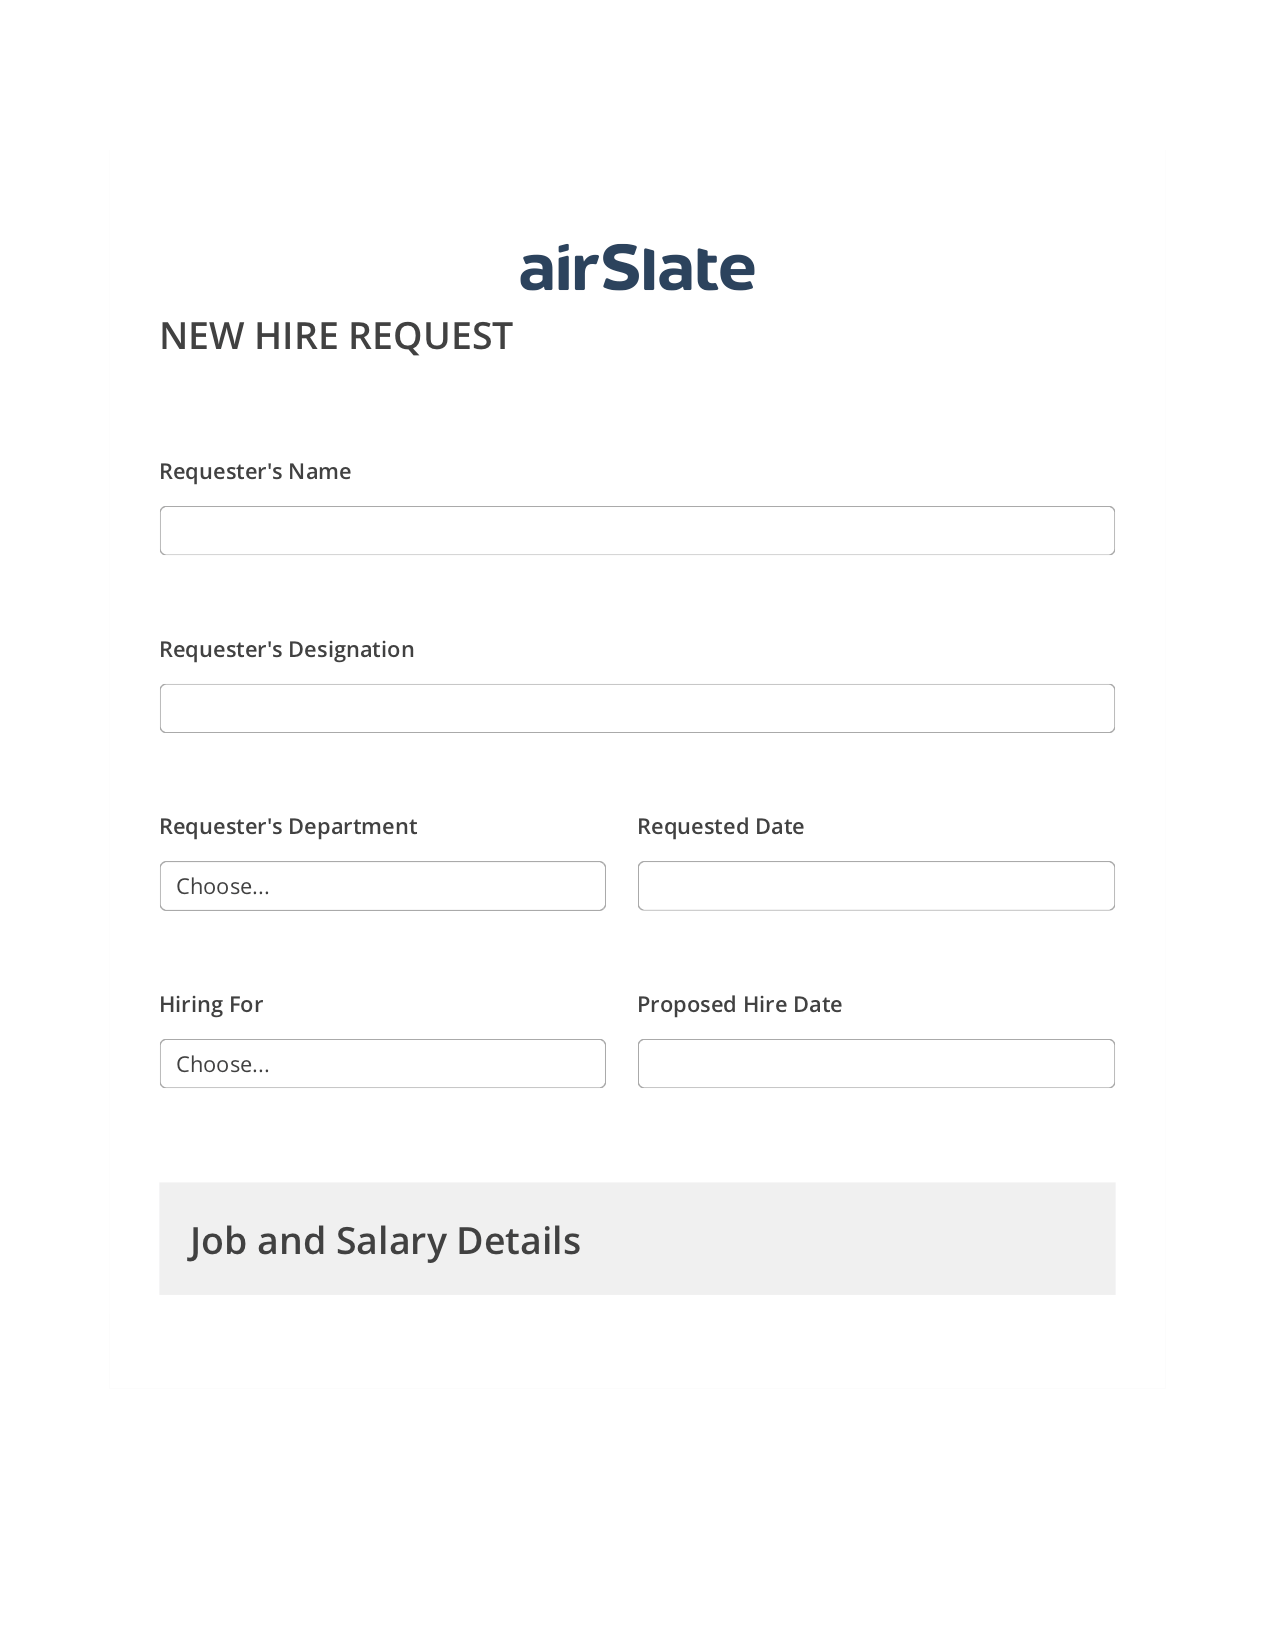 Hiring Request Workflow Pre-fill from another Slate Bot, Create slate from another Flow Bot, Archive to Dropbox Bot